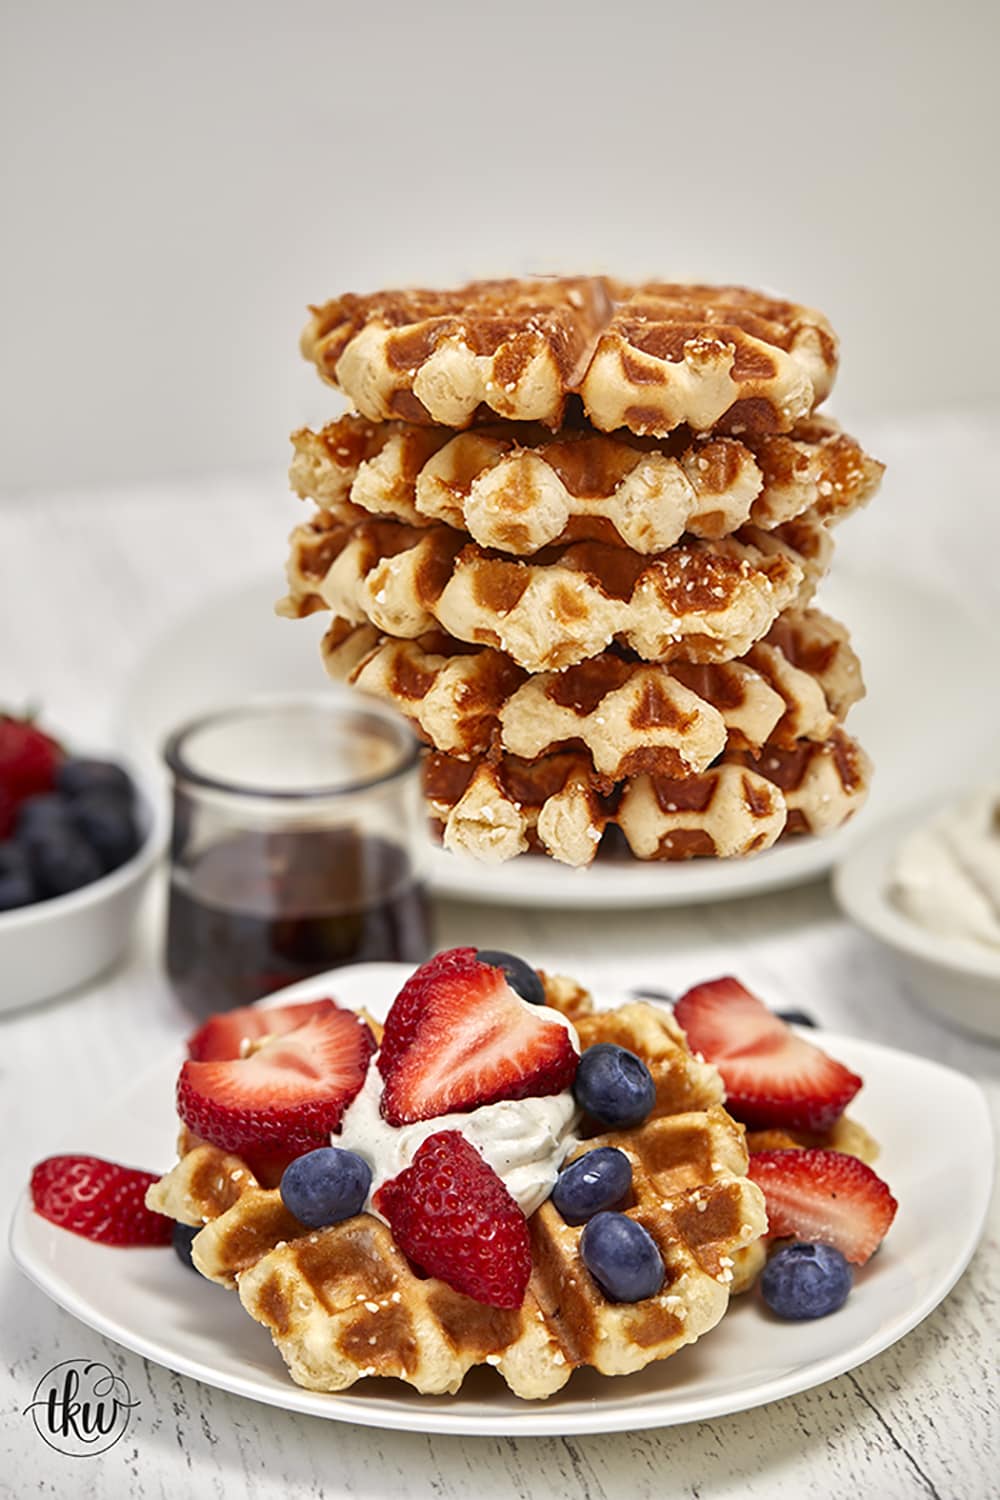 This Breakfast Maker Lets You Stuff Belgian Waffles With All the